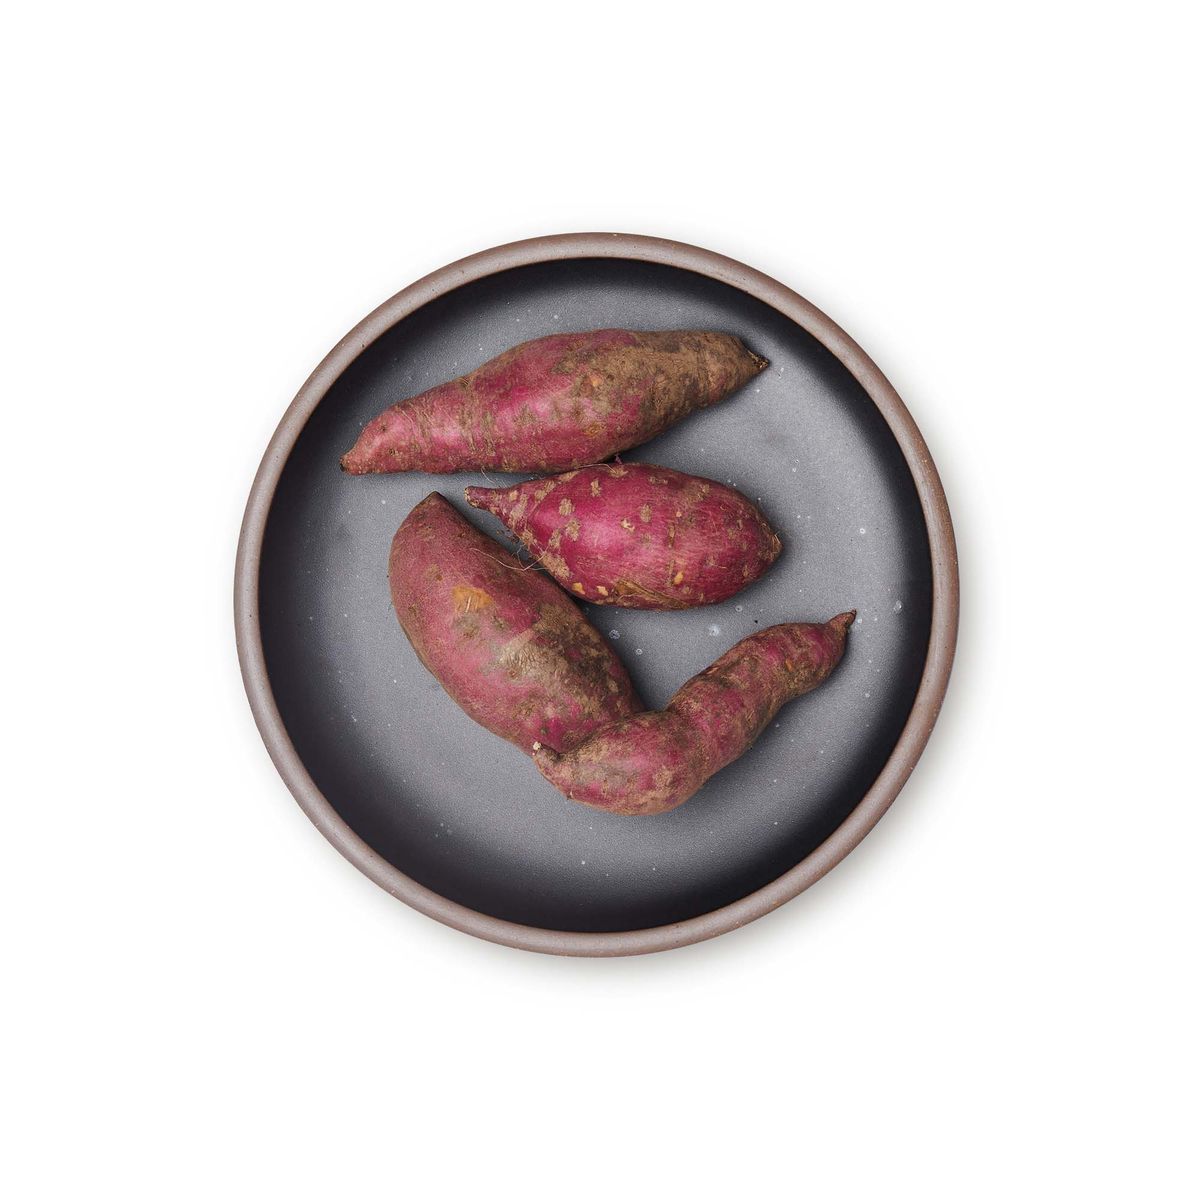 Sweet potatoes on a dinner sized ceramic plate in a graphite black color featuring iron speckles and an unglazed rim